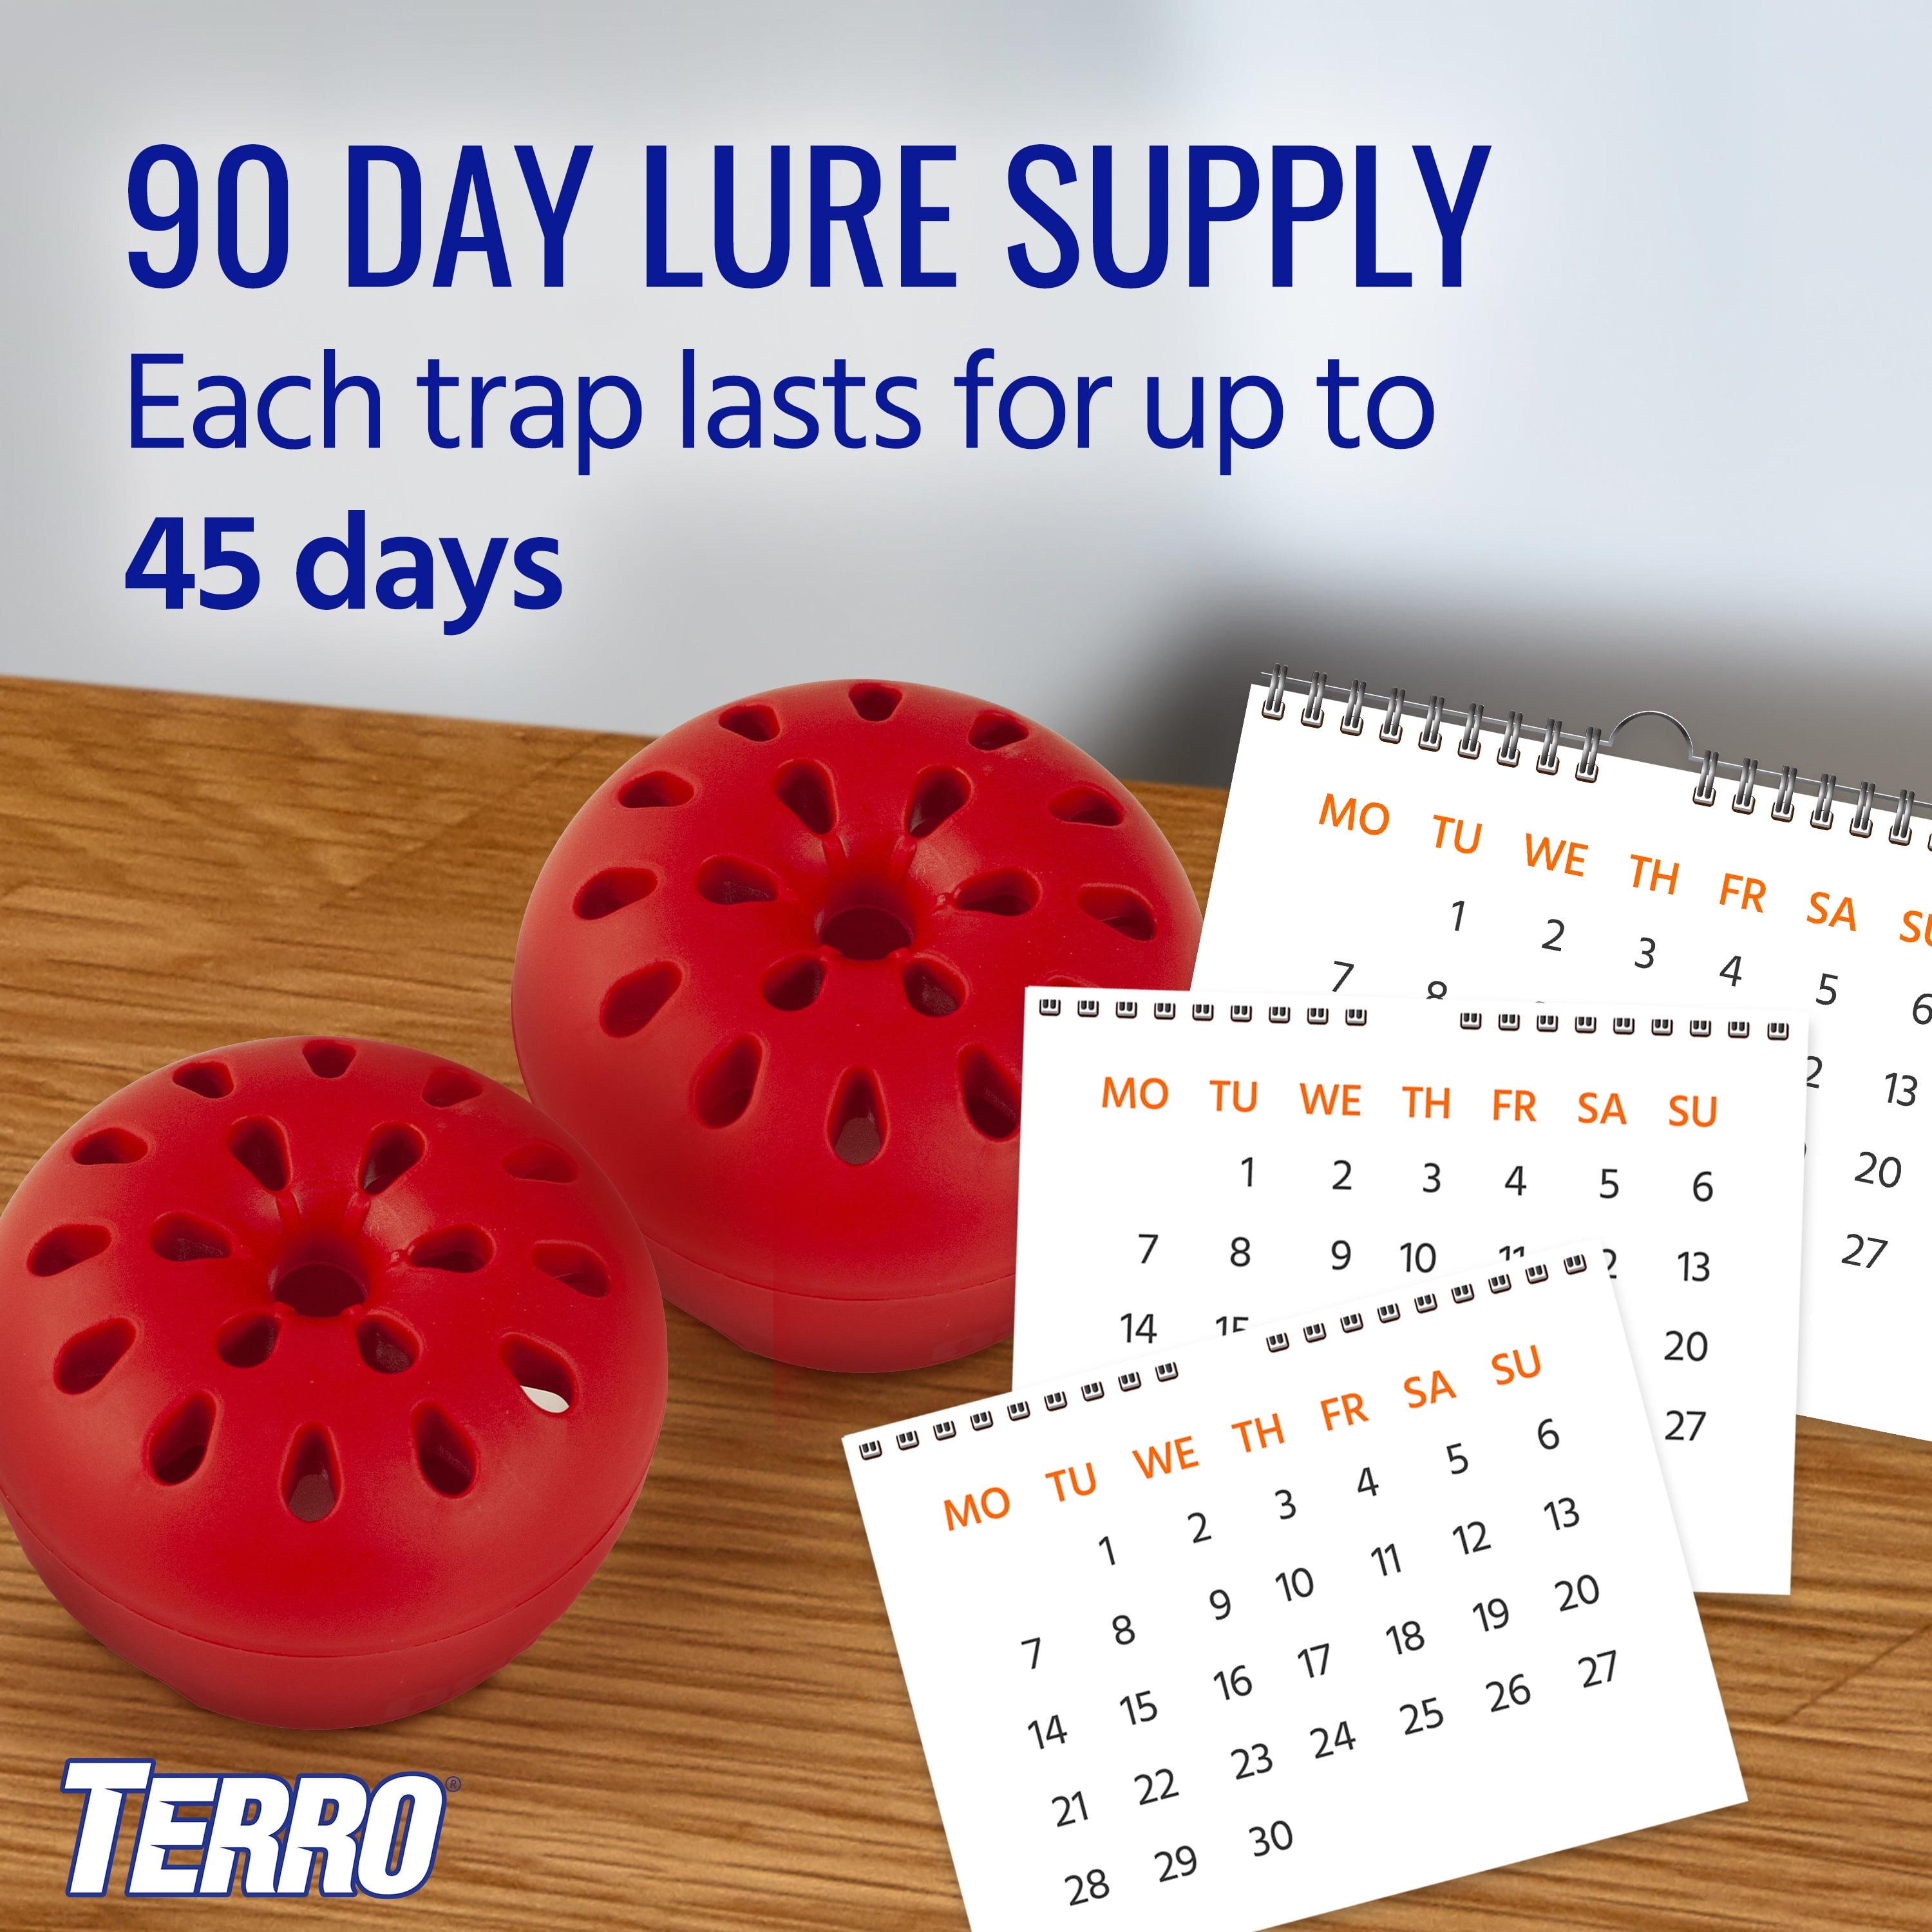 TERRO Fruit Fly Indoor Insect Trap (2-Pack) at